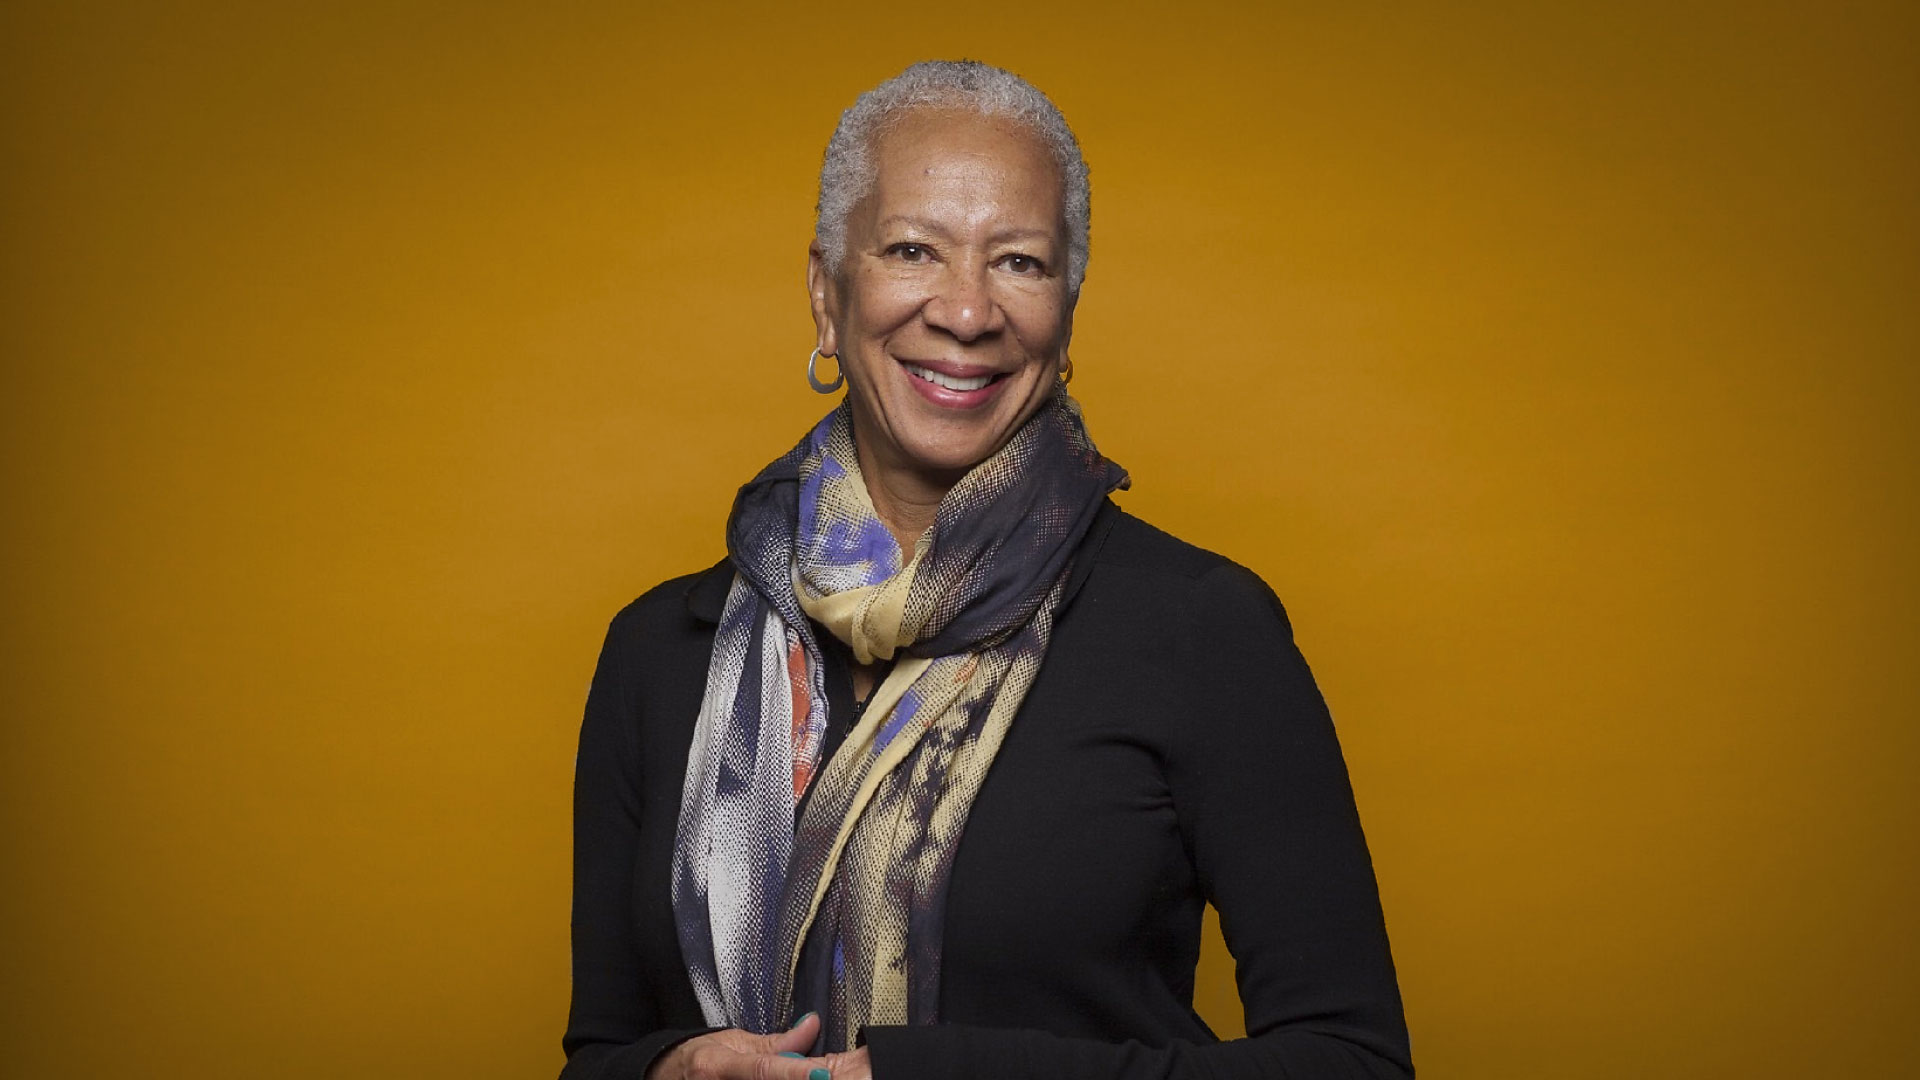 https://unfinished.com/news/unfinished-welcomes-angela-glover-blackwell-as-network-chairperson/